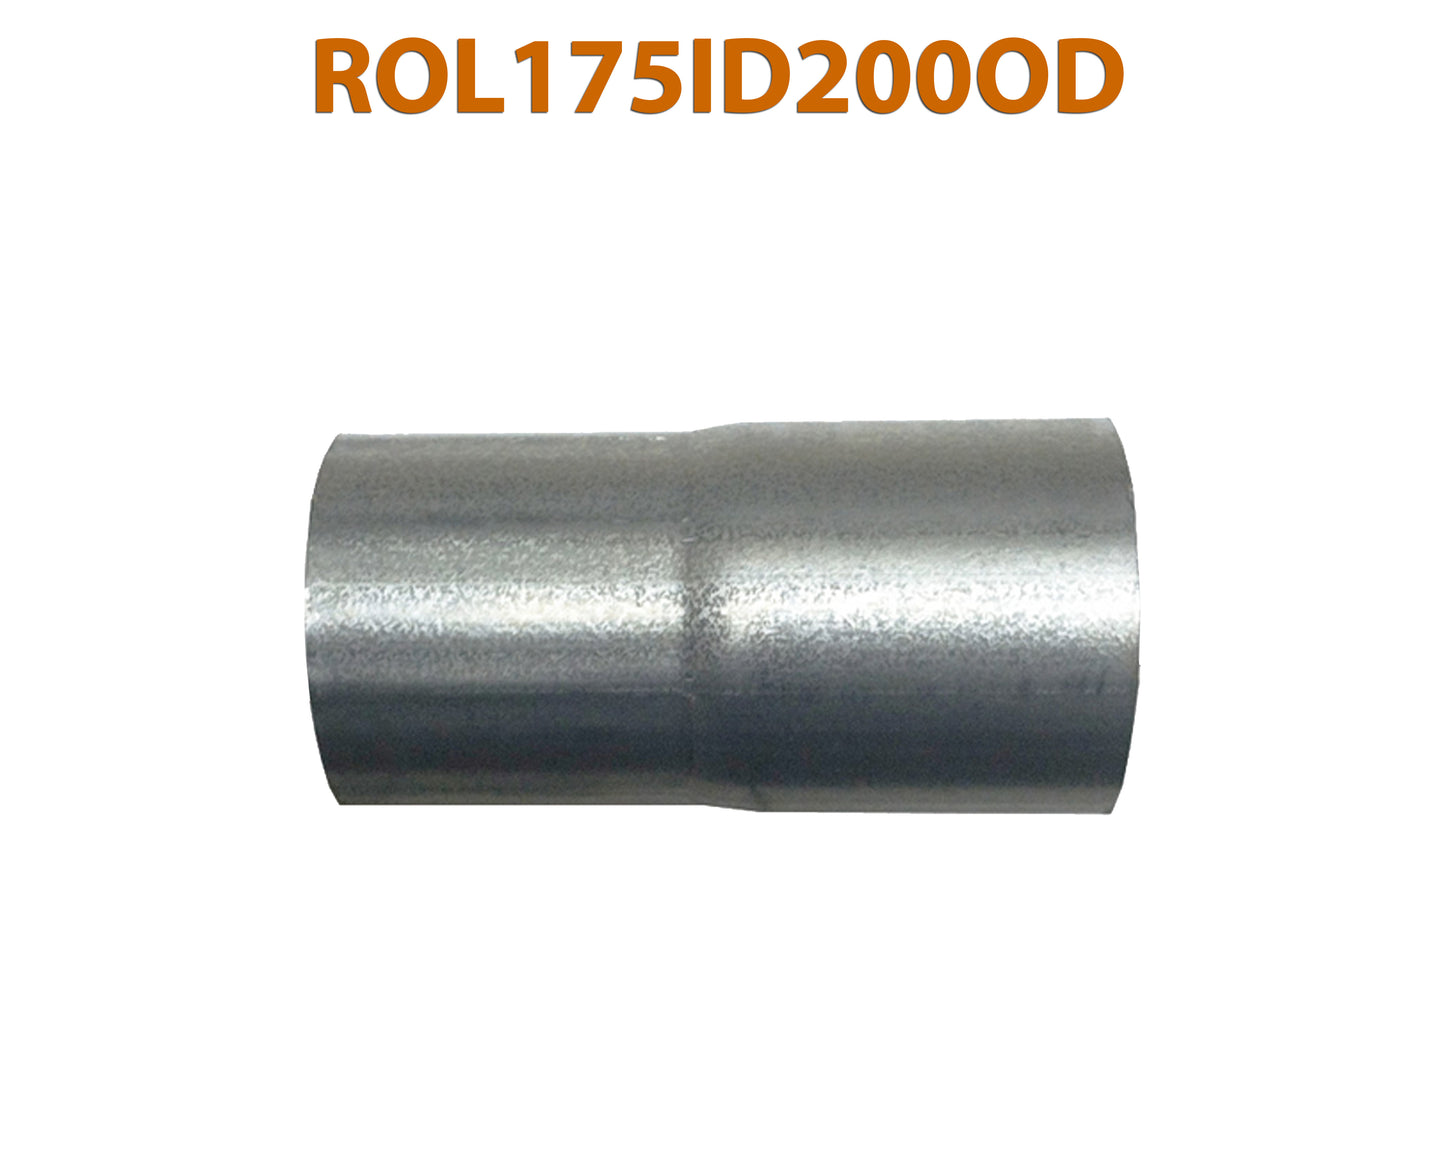 ROL175ID200OD 548507 1 3/4” ID to 2” OD Universal Exhaust Pipe to Component Adapter Reducer